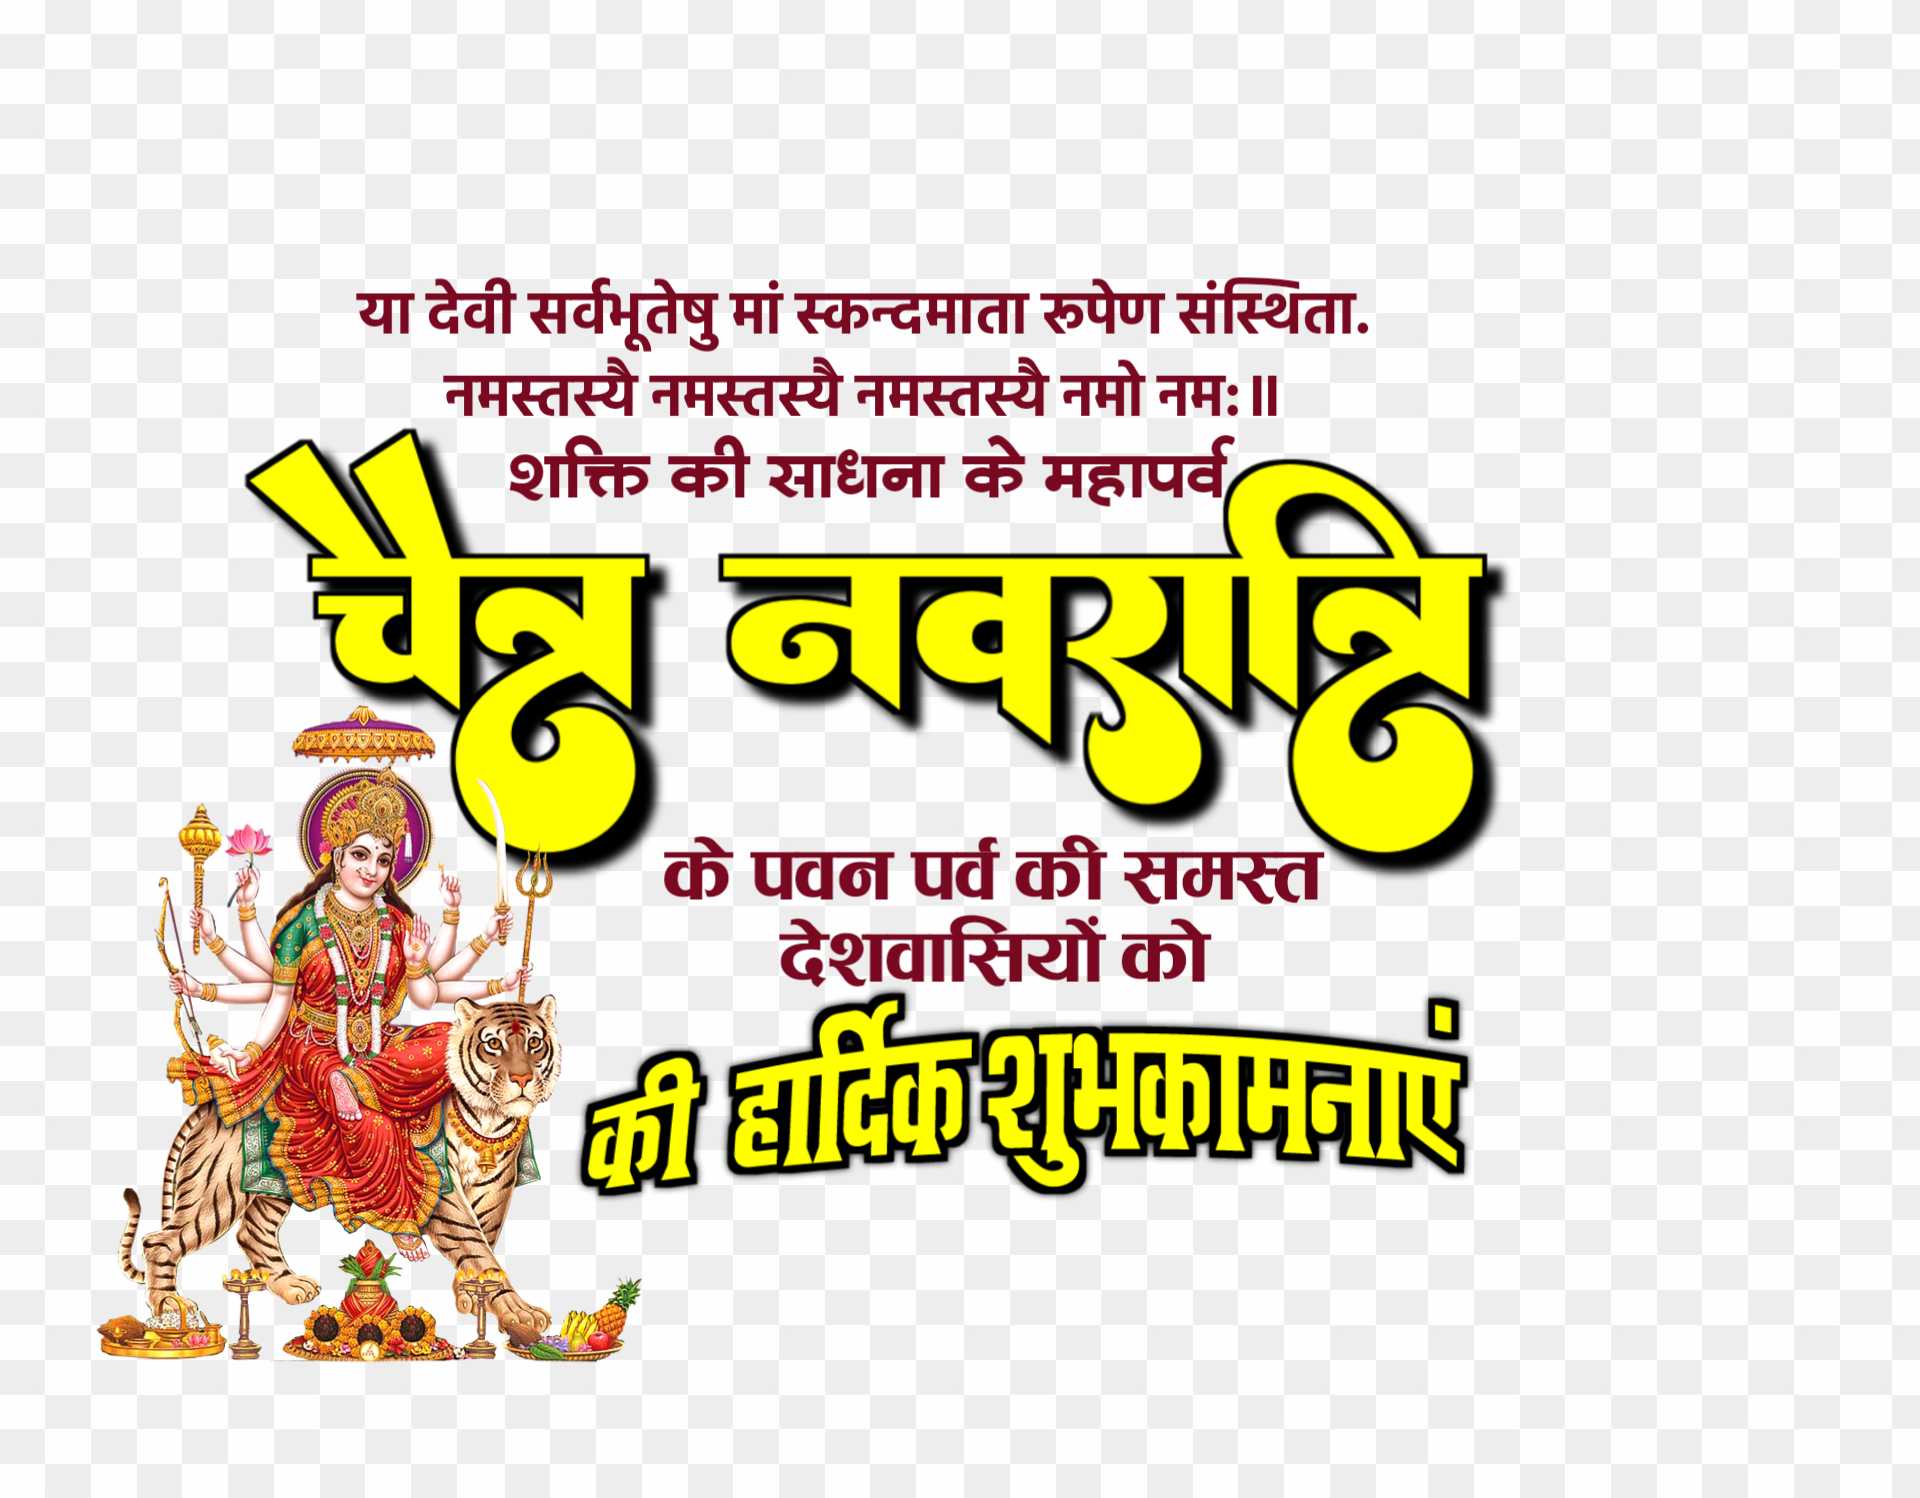 Chaitra Navratra png images download